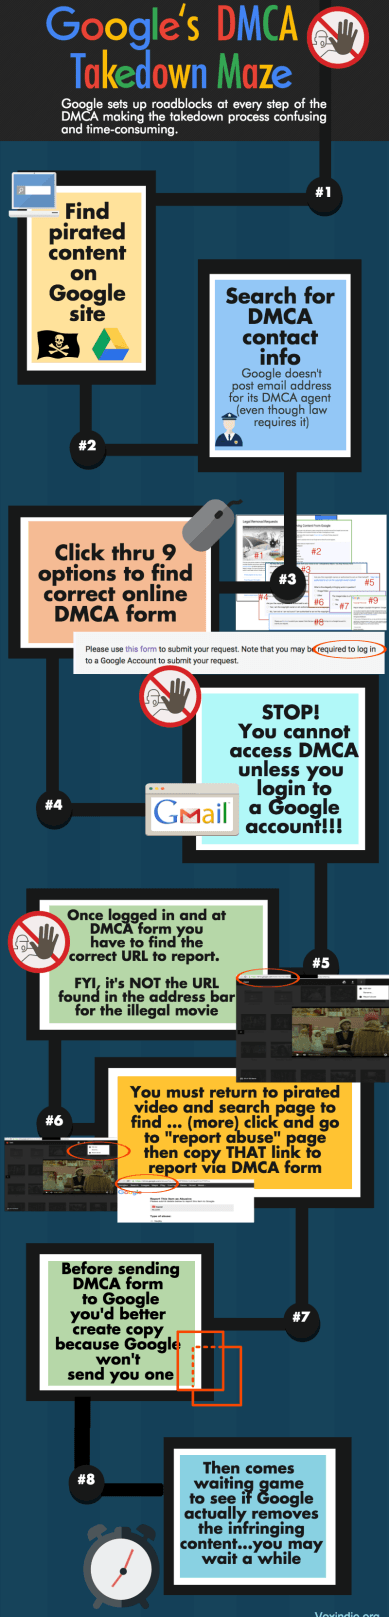 Vox Indie's infographic on Google DMCA process